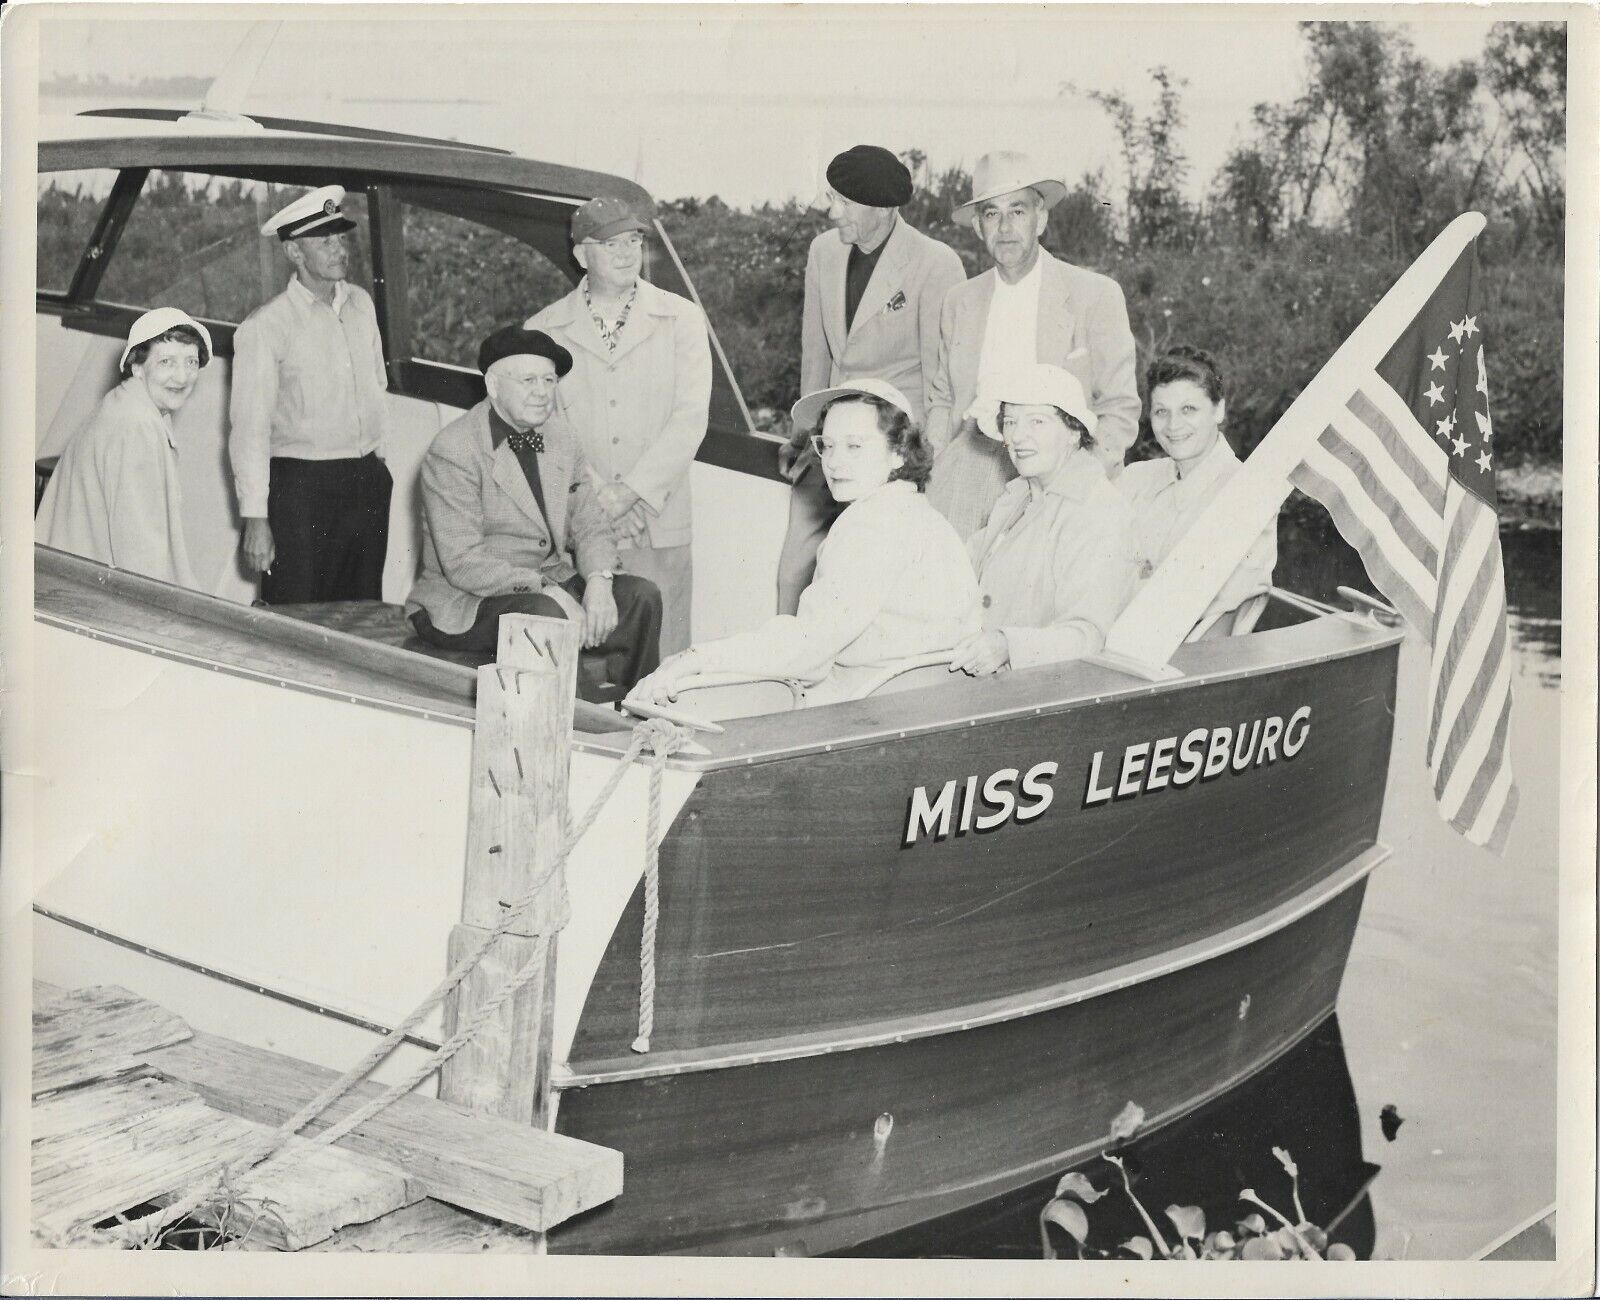 Boat Photograph Miss Leesburg 1950s Vintage Fashion Boating Travel Tour 8x10